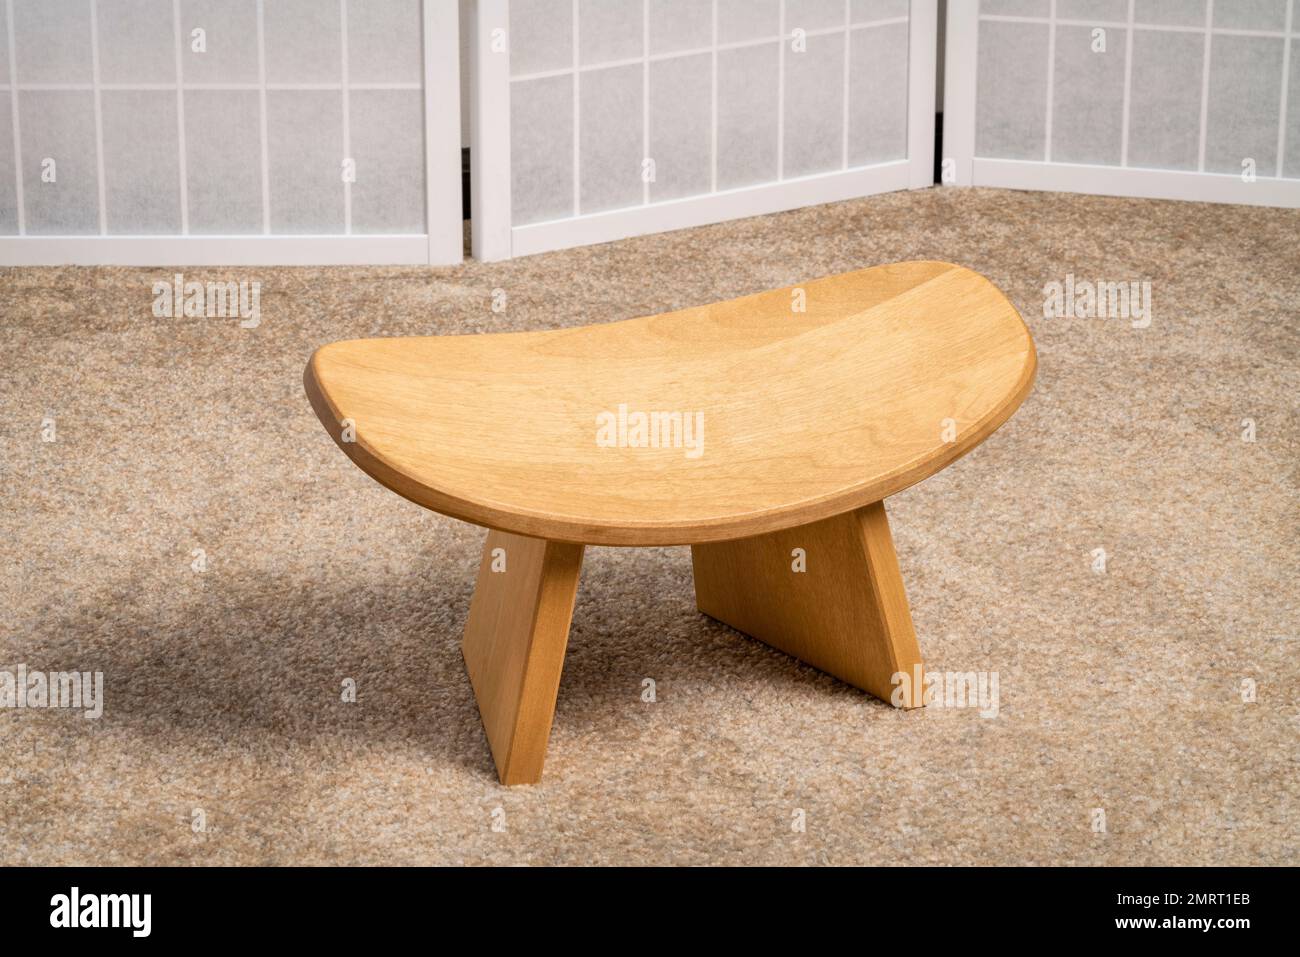 meditation, kneeling bench to sit in a natural, balanced and relaxed posture Stock Photo